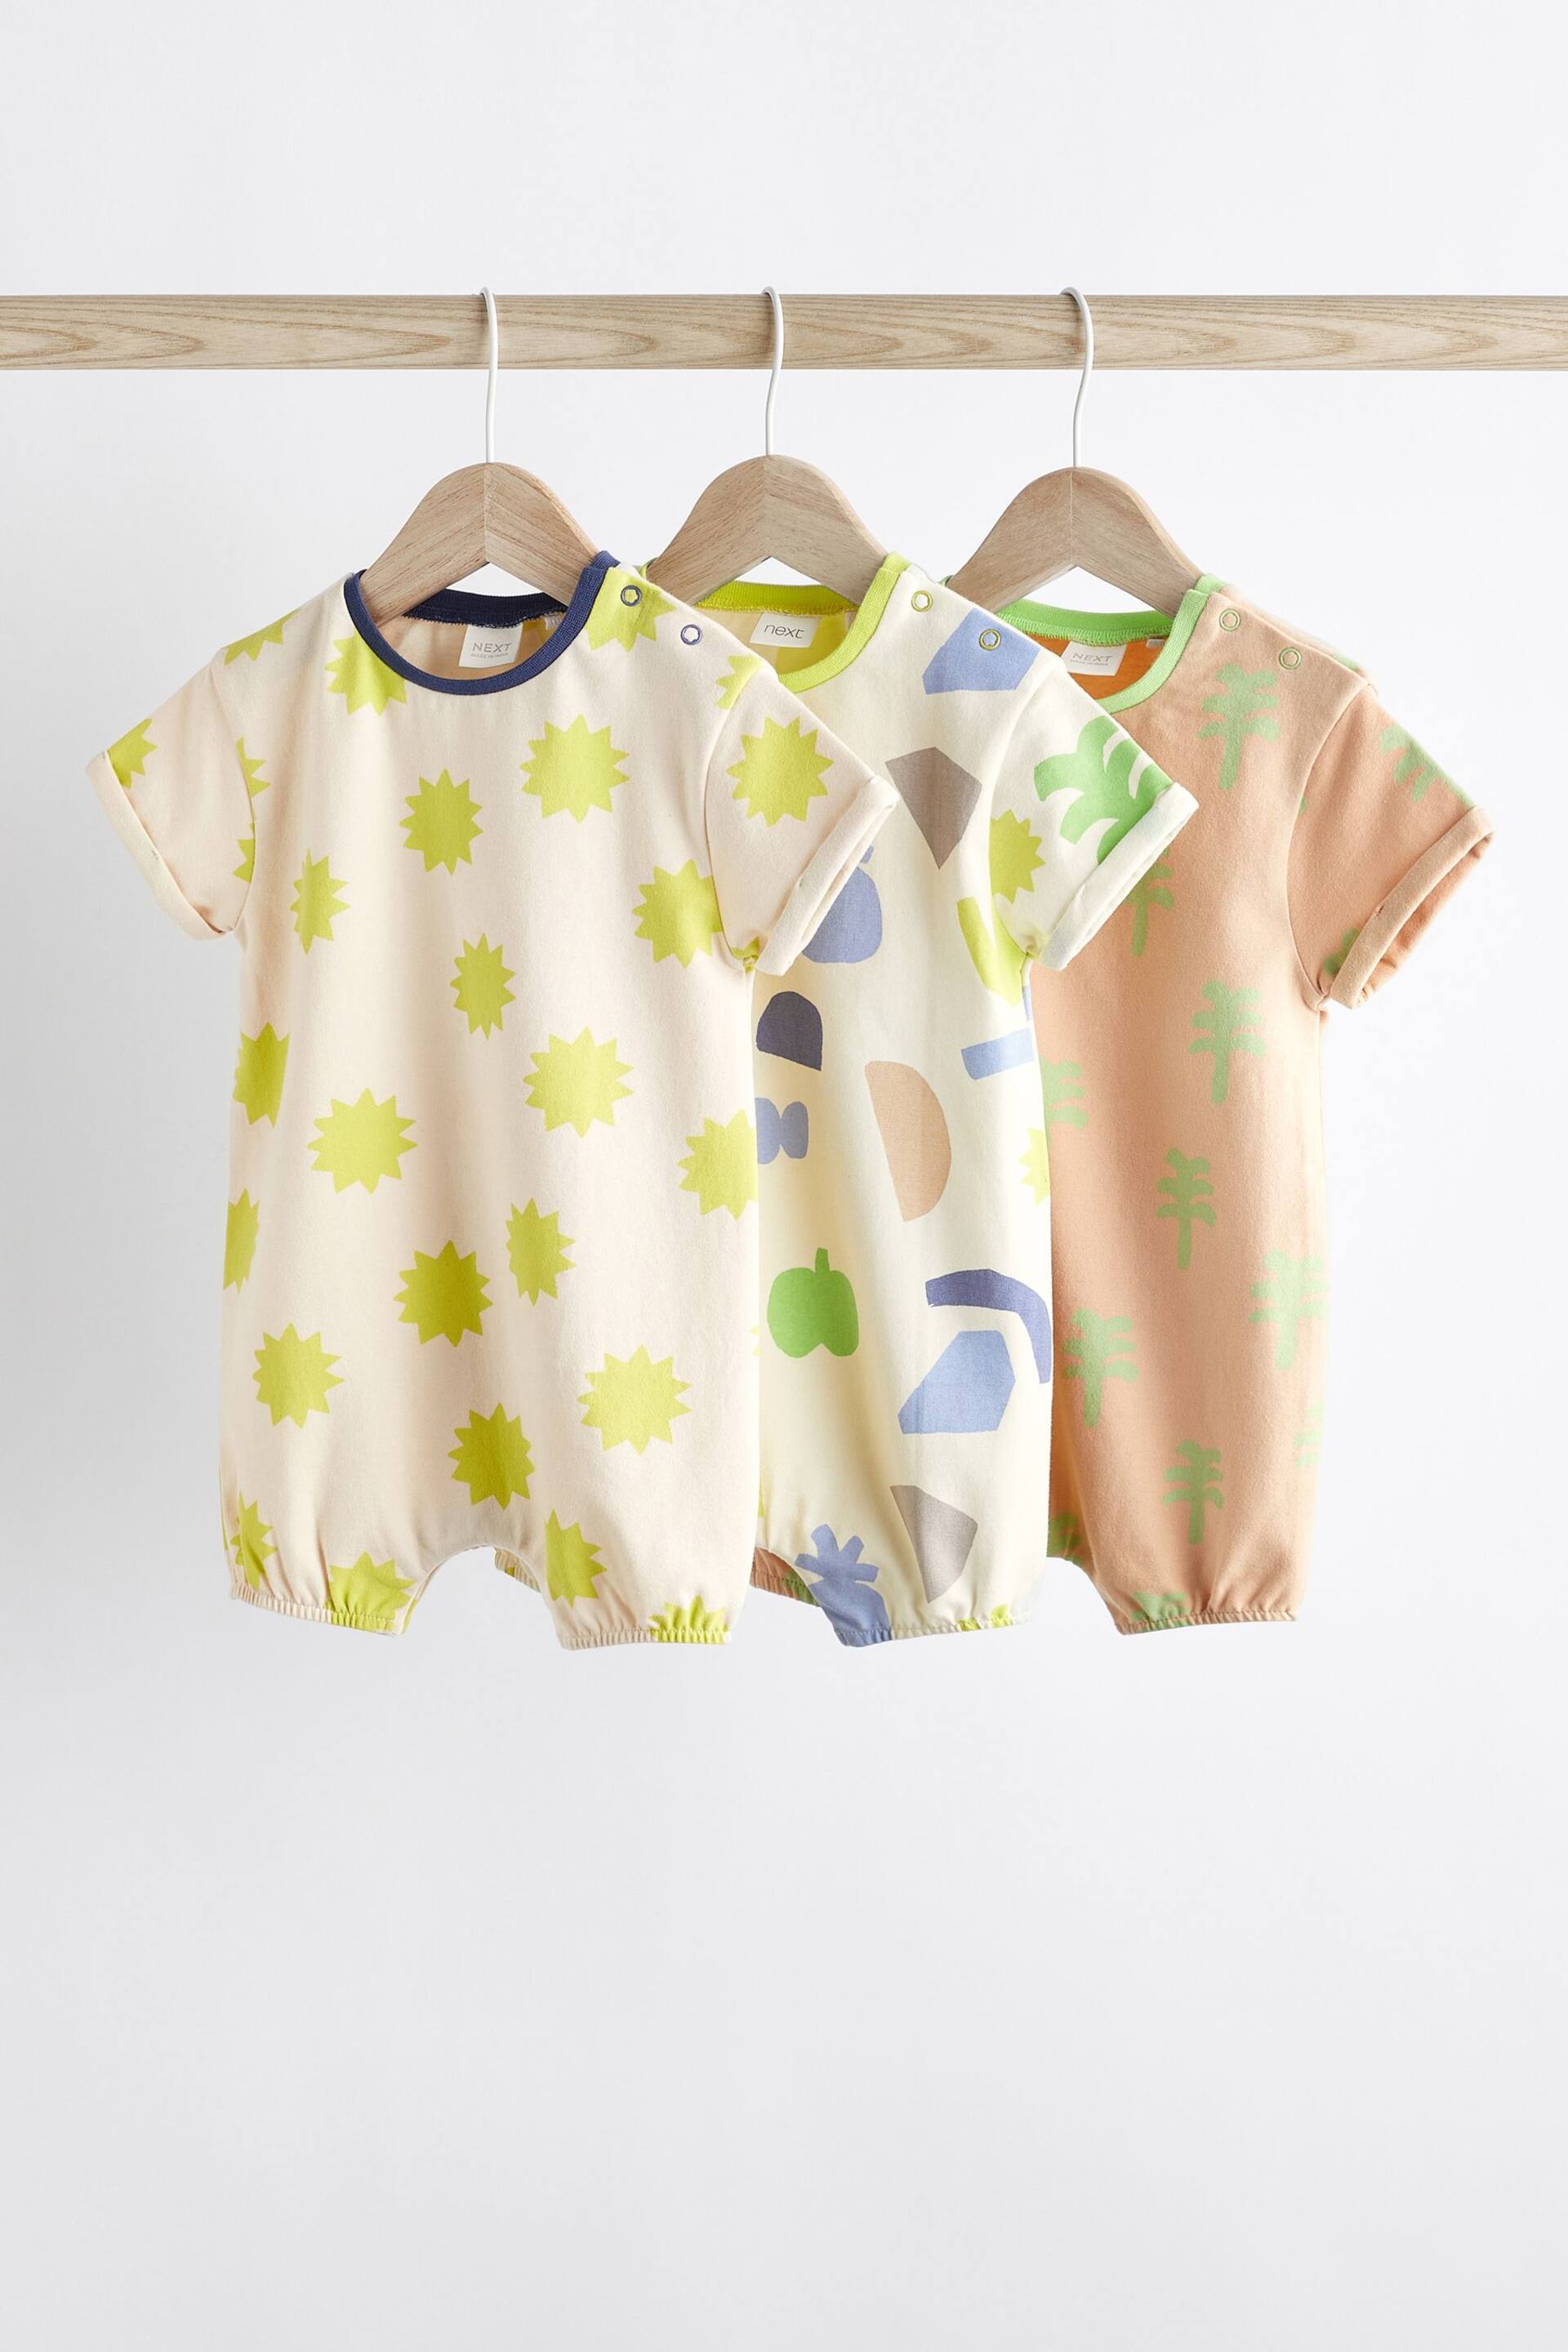 Bright Abstract Baby Jersey Rompers 3 Pack - Image 1 of 6